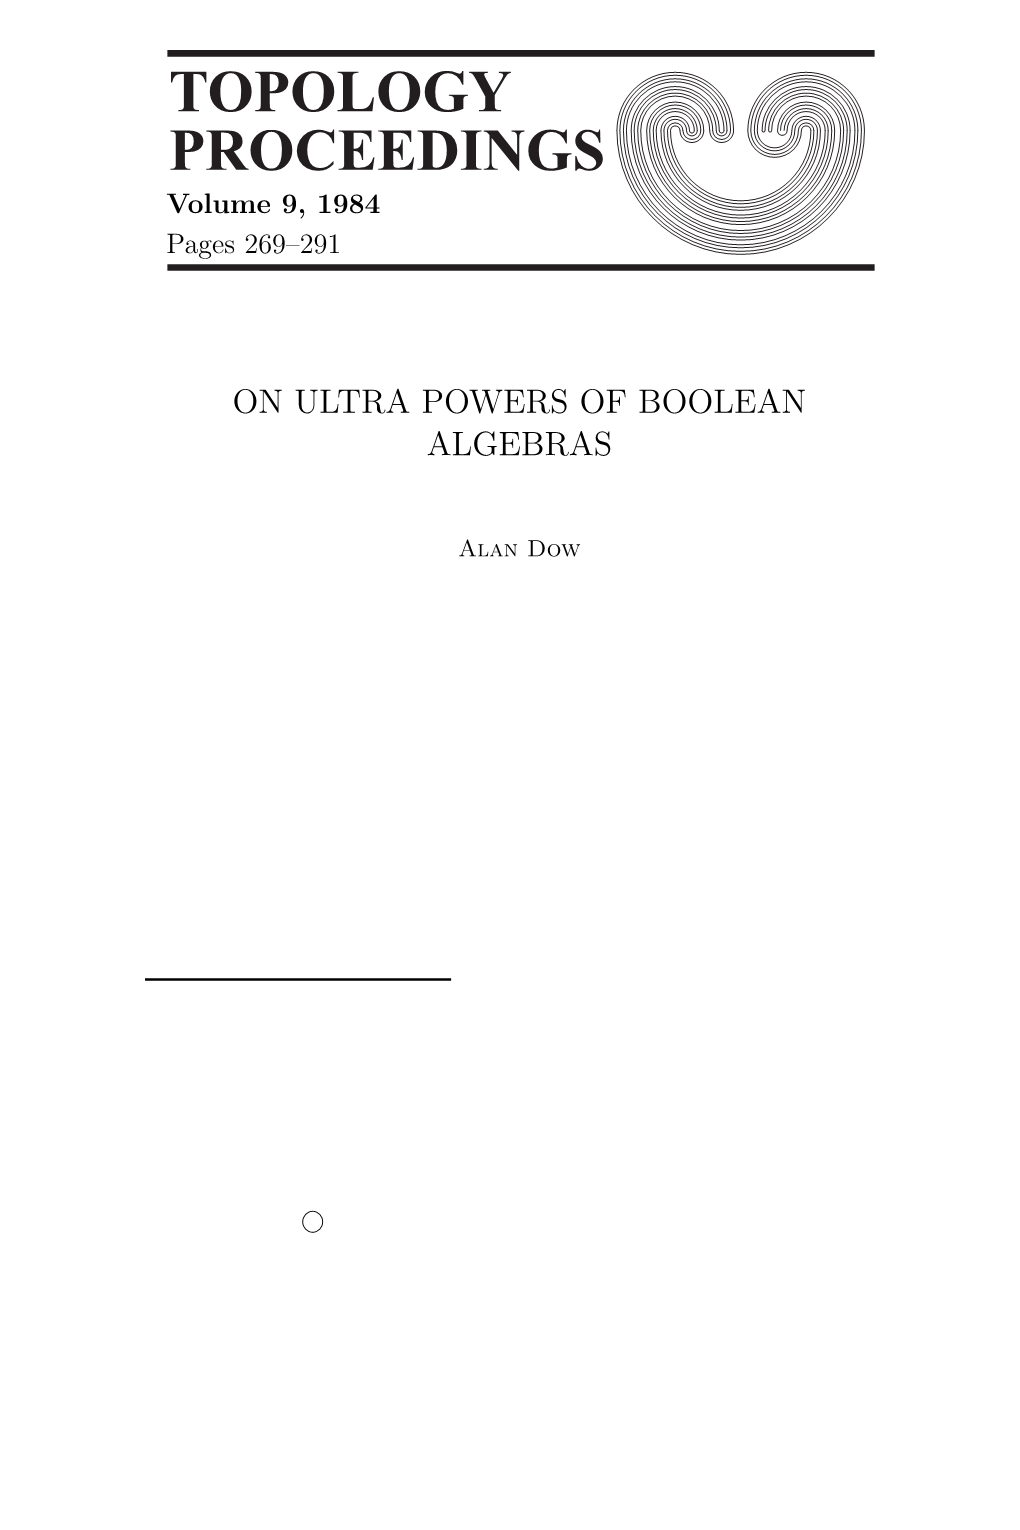 Topology Proceedings 9 (1984) Pp. 269-291: on ULTRA POWERS OF